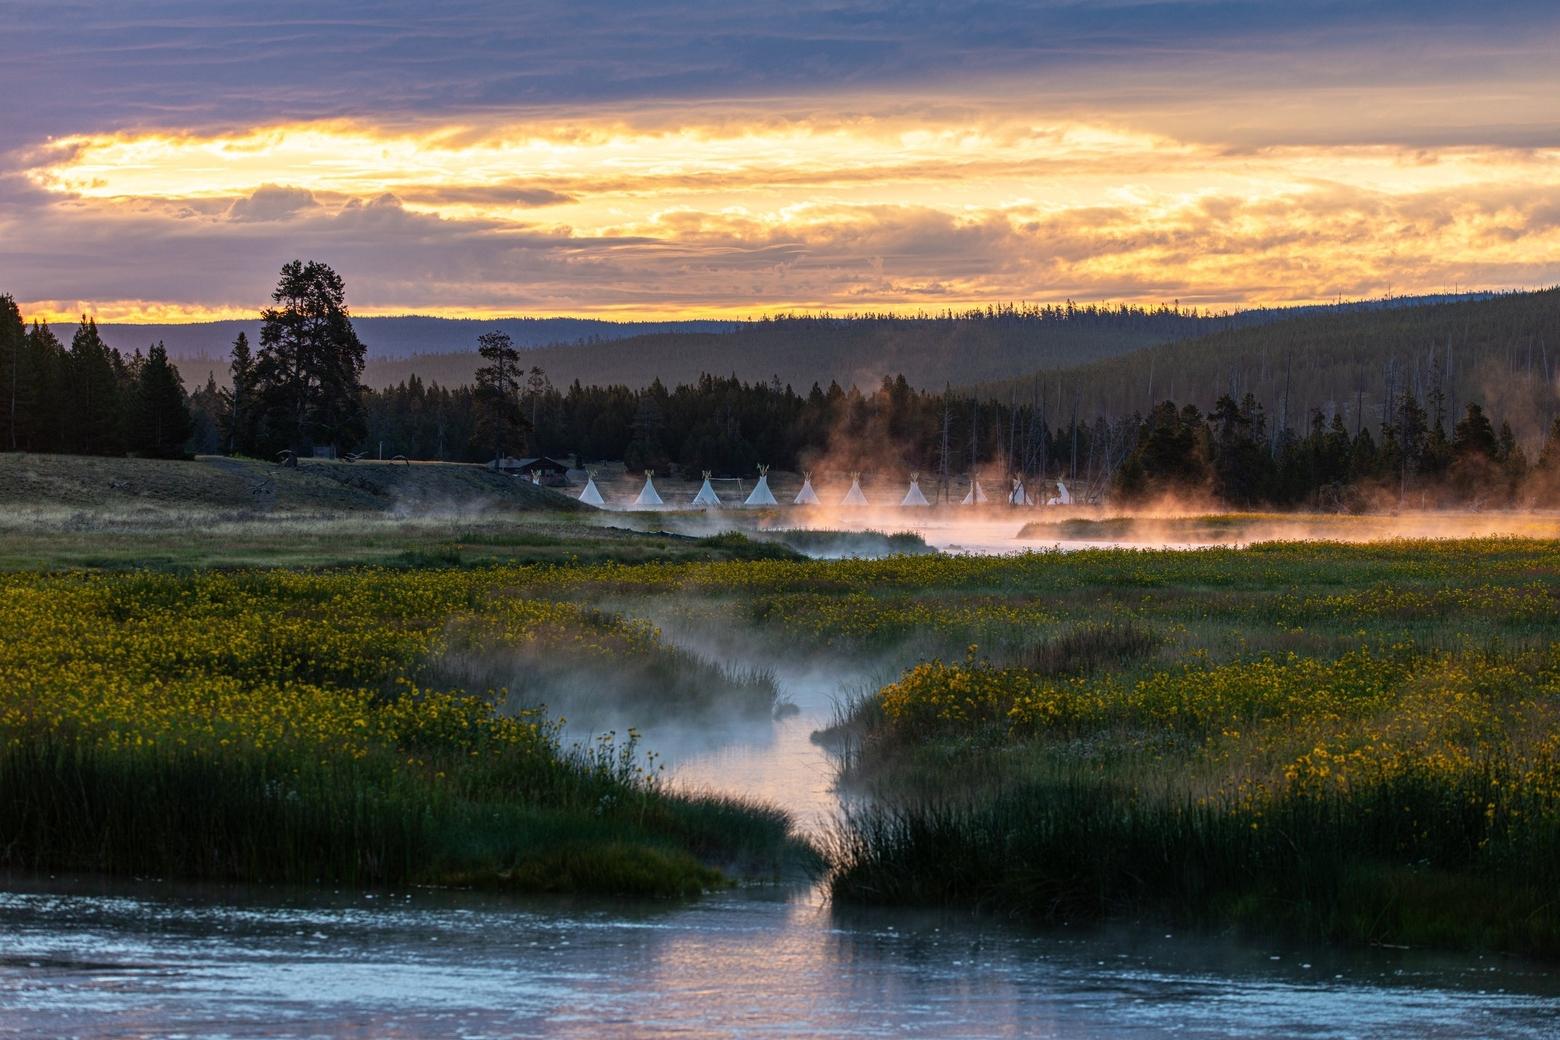 Yellowstone Revealed debuted in Yellowstone National Park and Gardiner, Montana, in August of 2022, the year the park celebrated its 150th anniversary. The project aimed to represent truths and perspectives of Indigenous people in the region. Photo by Alex Newby/Courtesy Mountain Time Arts